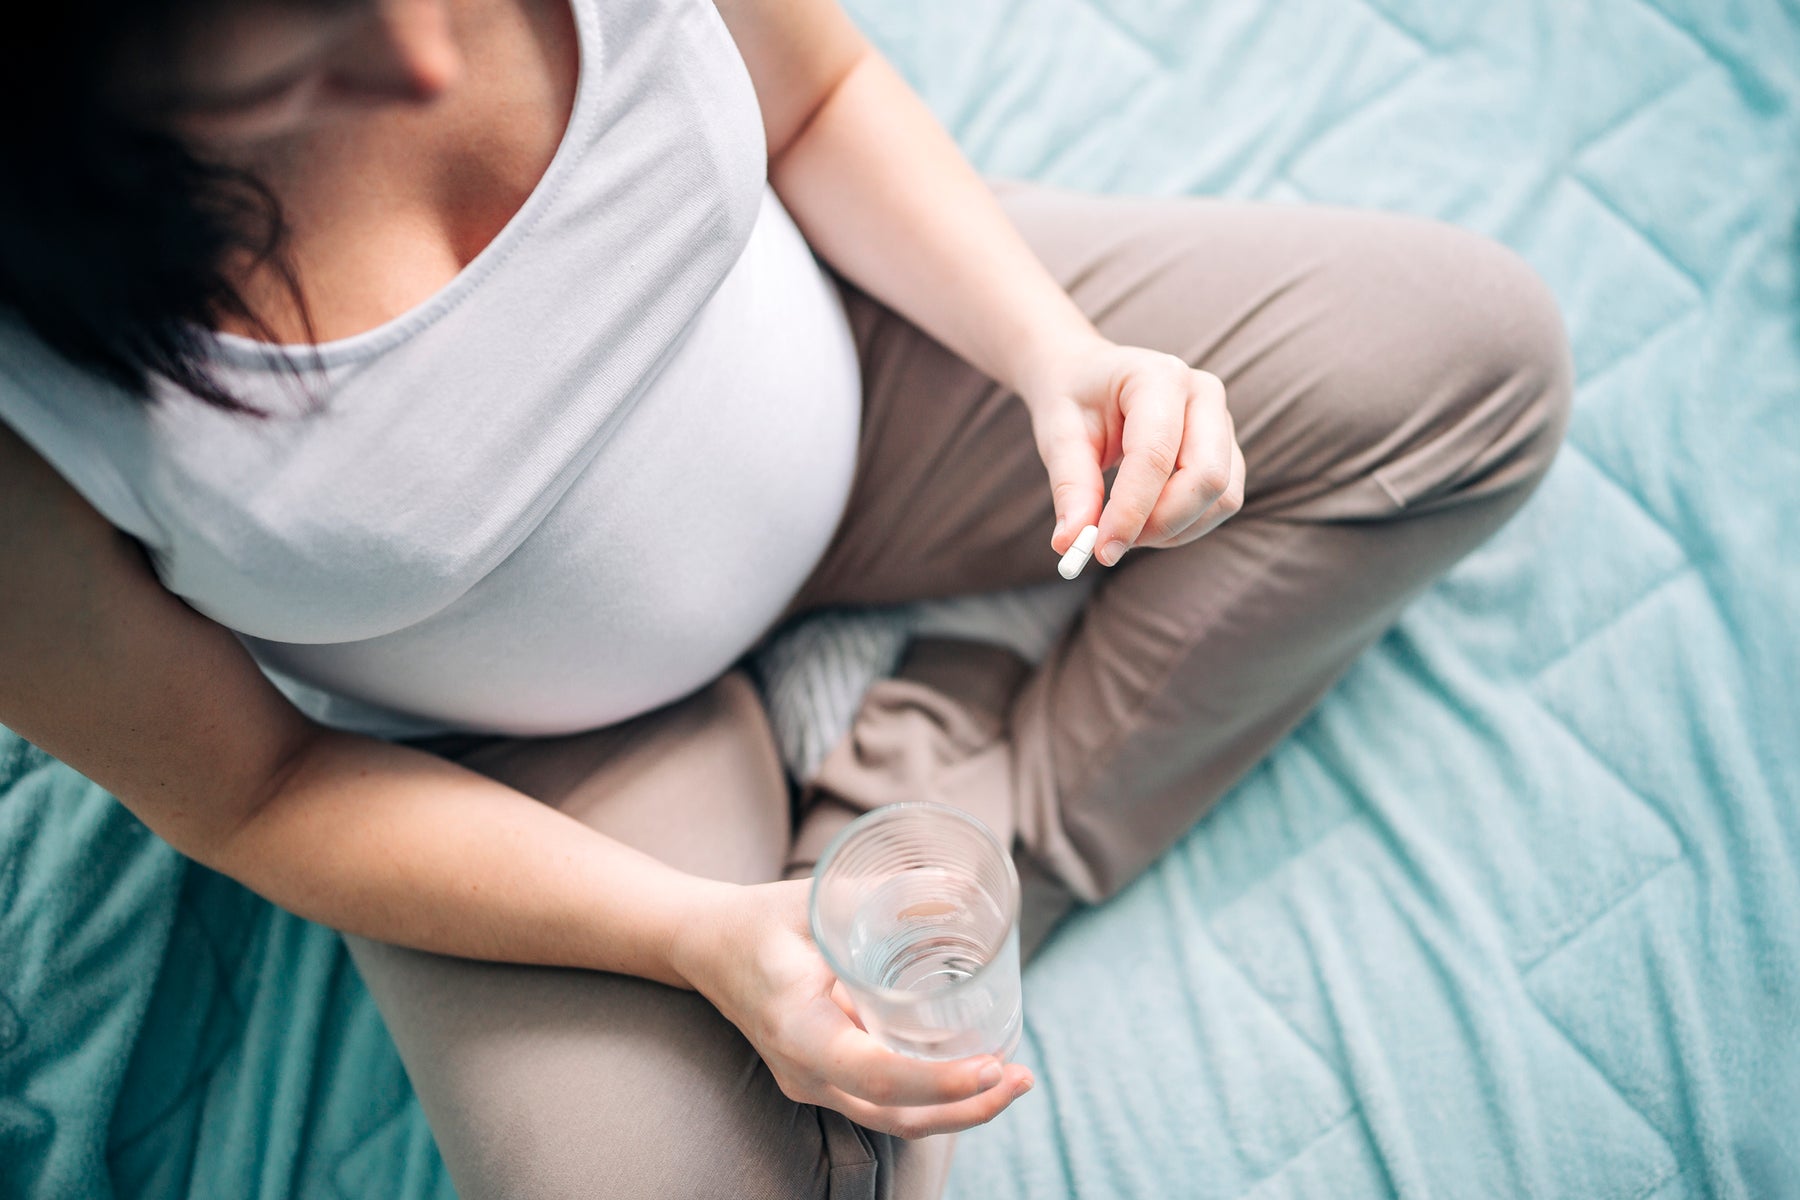 Woman taking iron tablets during pregnancy